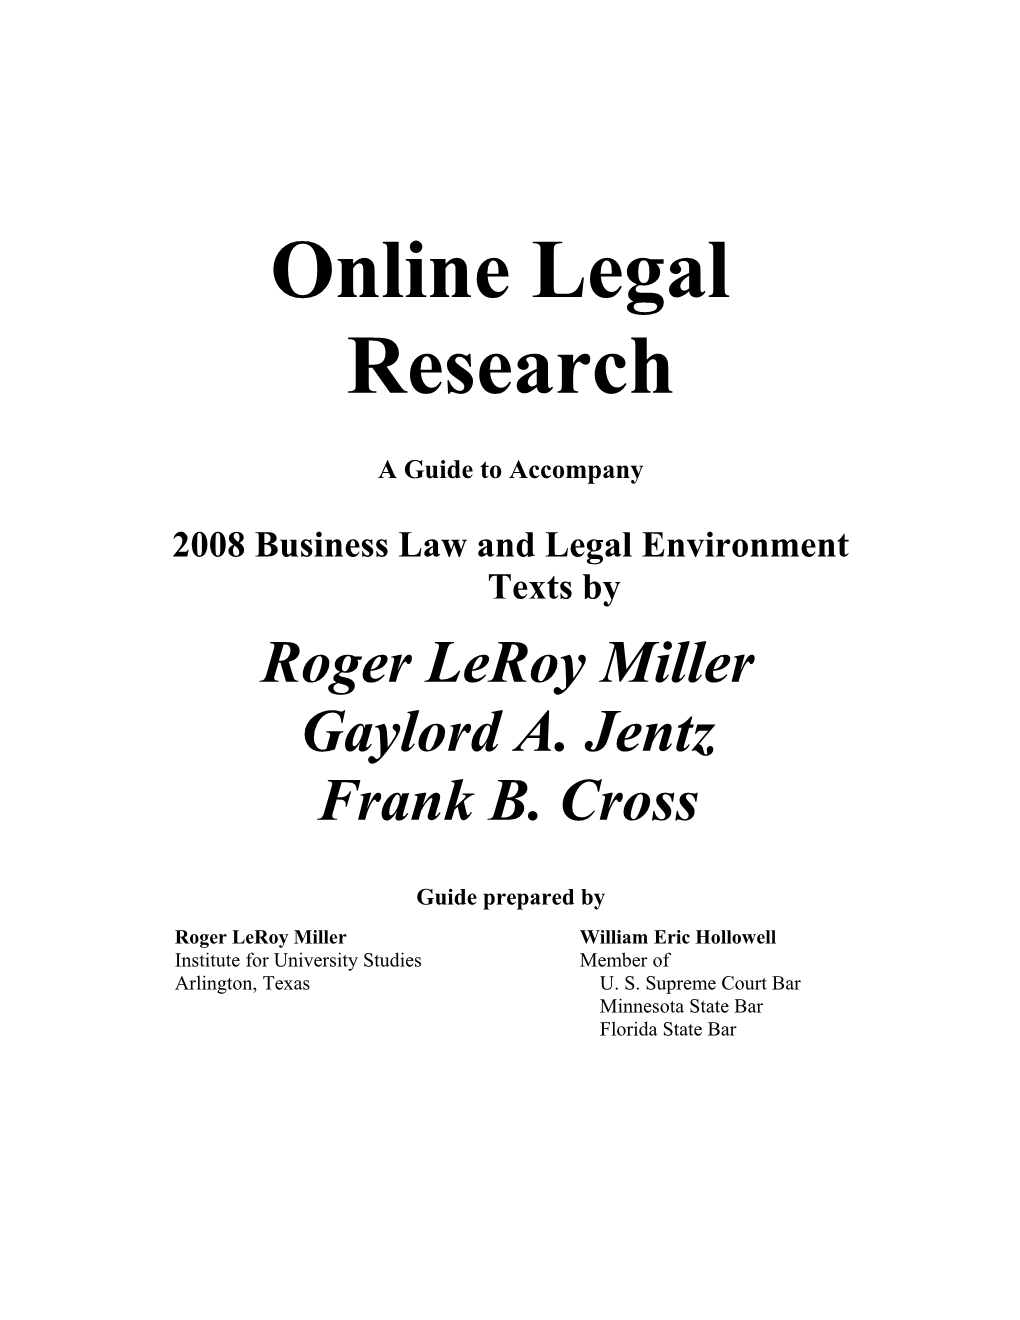 2008 Business Law and Legal Environment Texts By